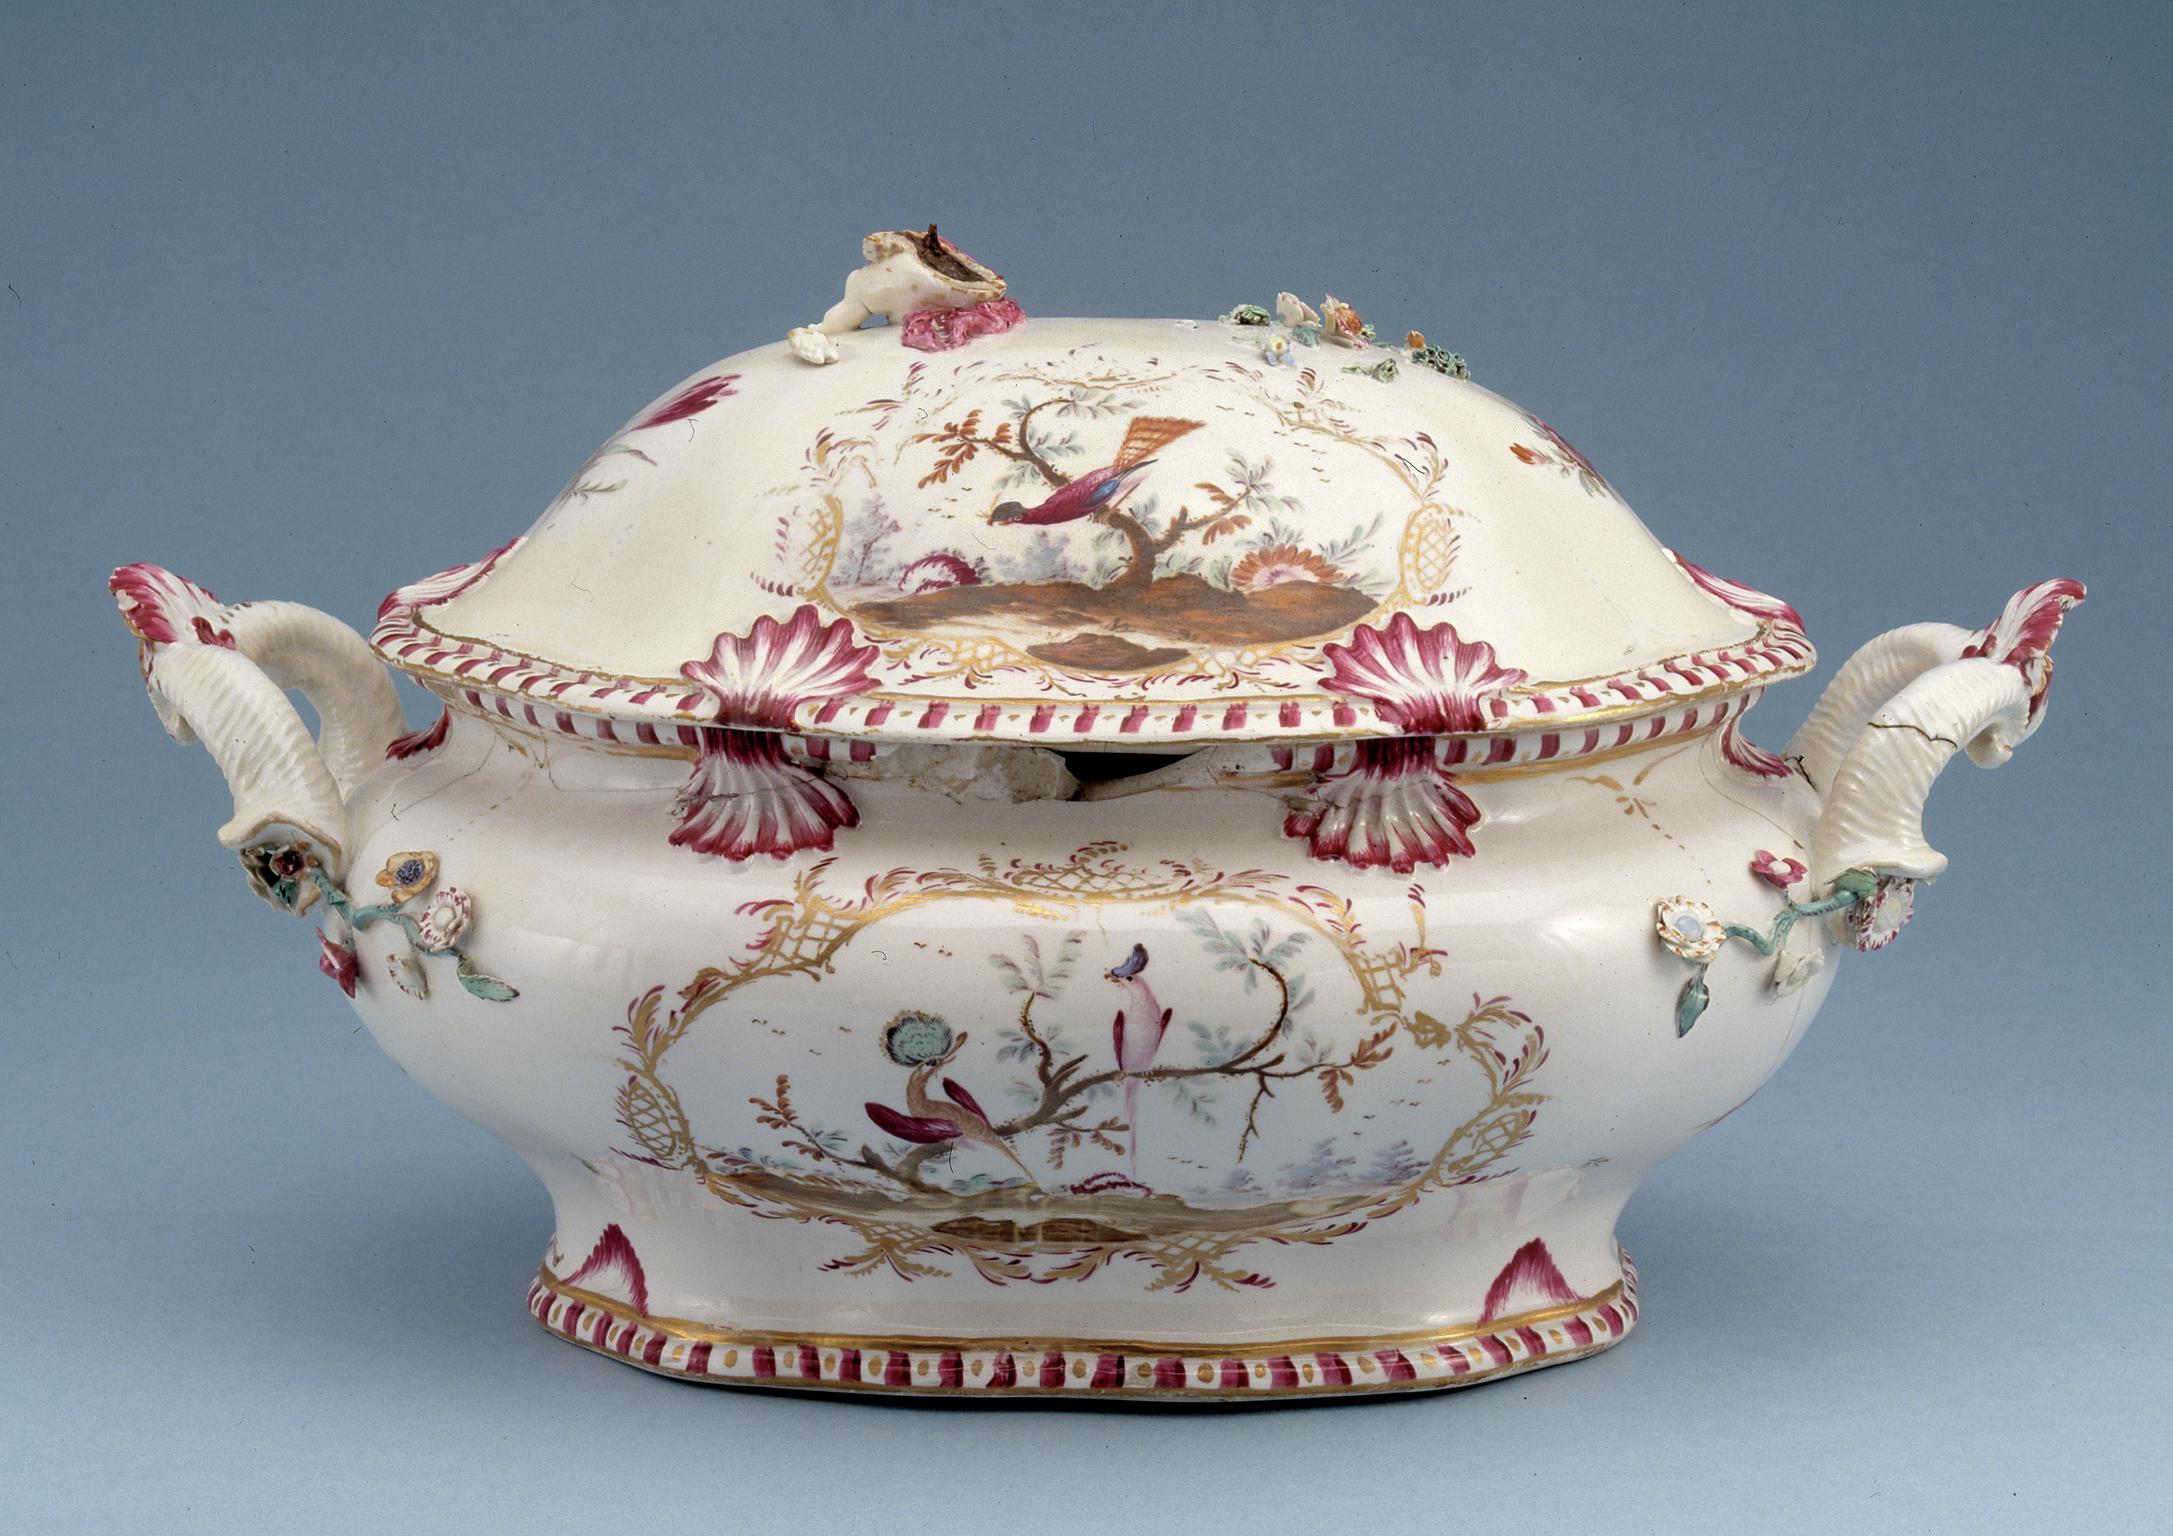 Tureen, cover and stand